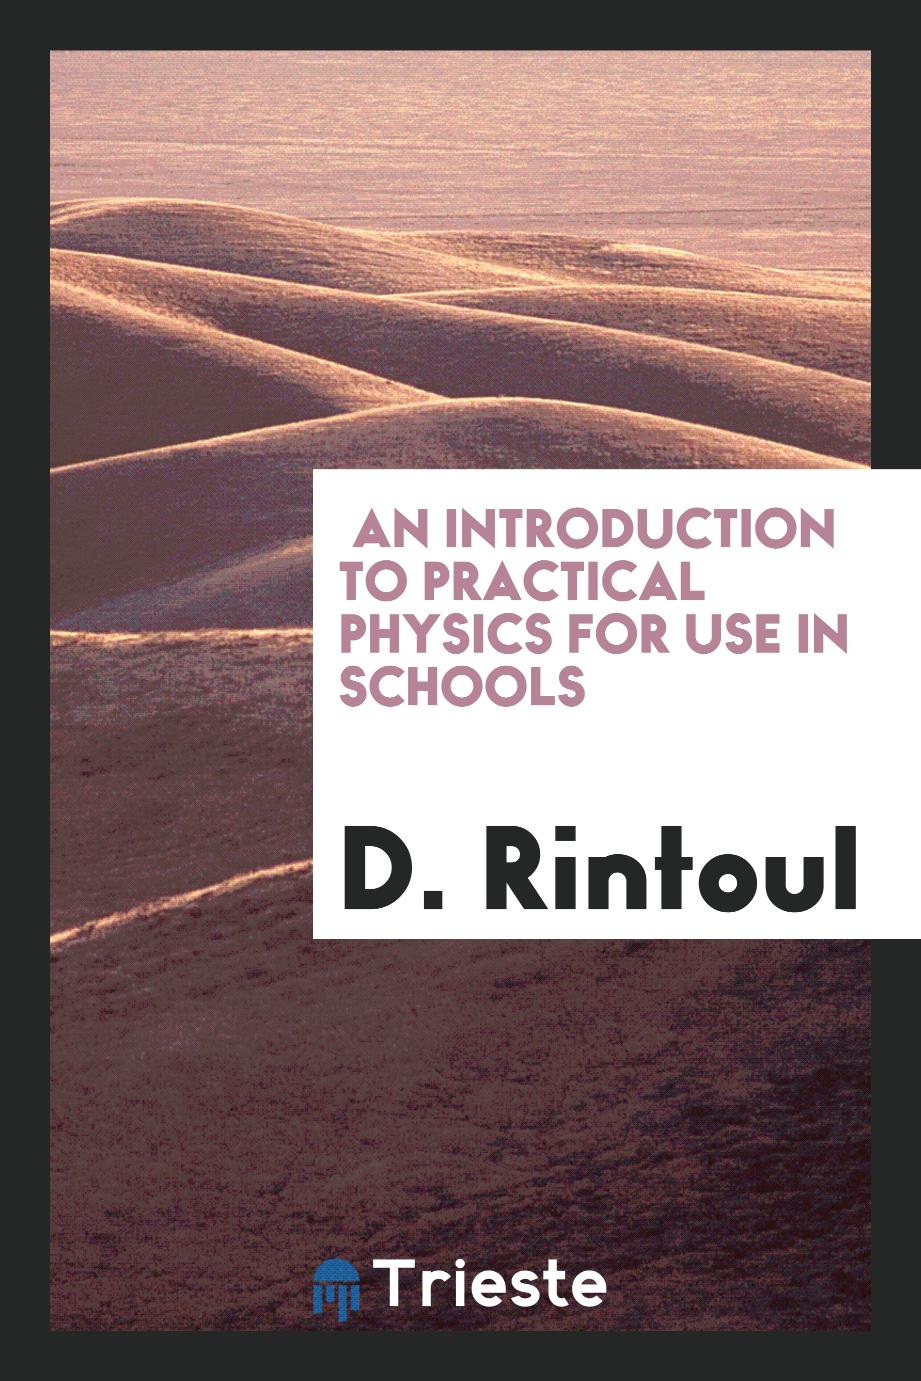 An Introduction to practical physics for use in schools